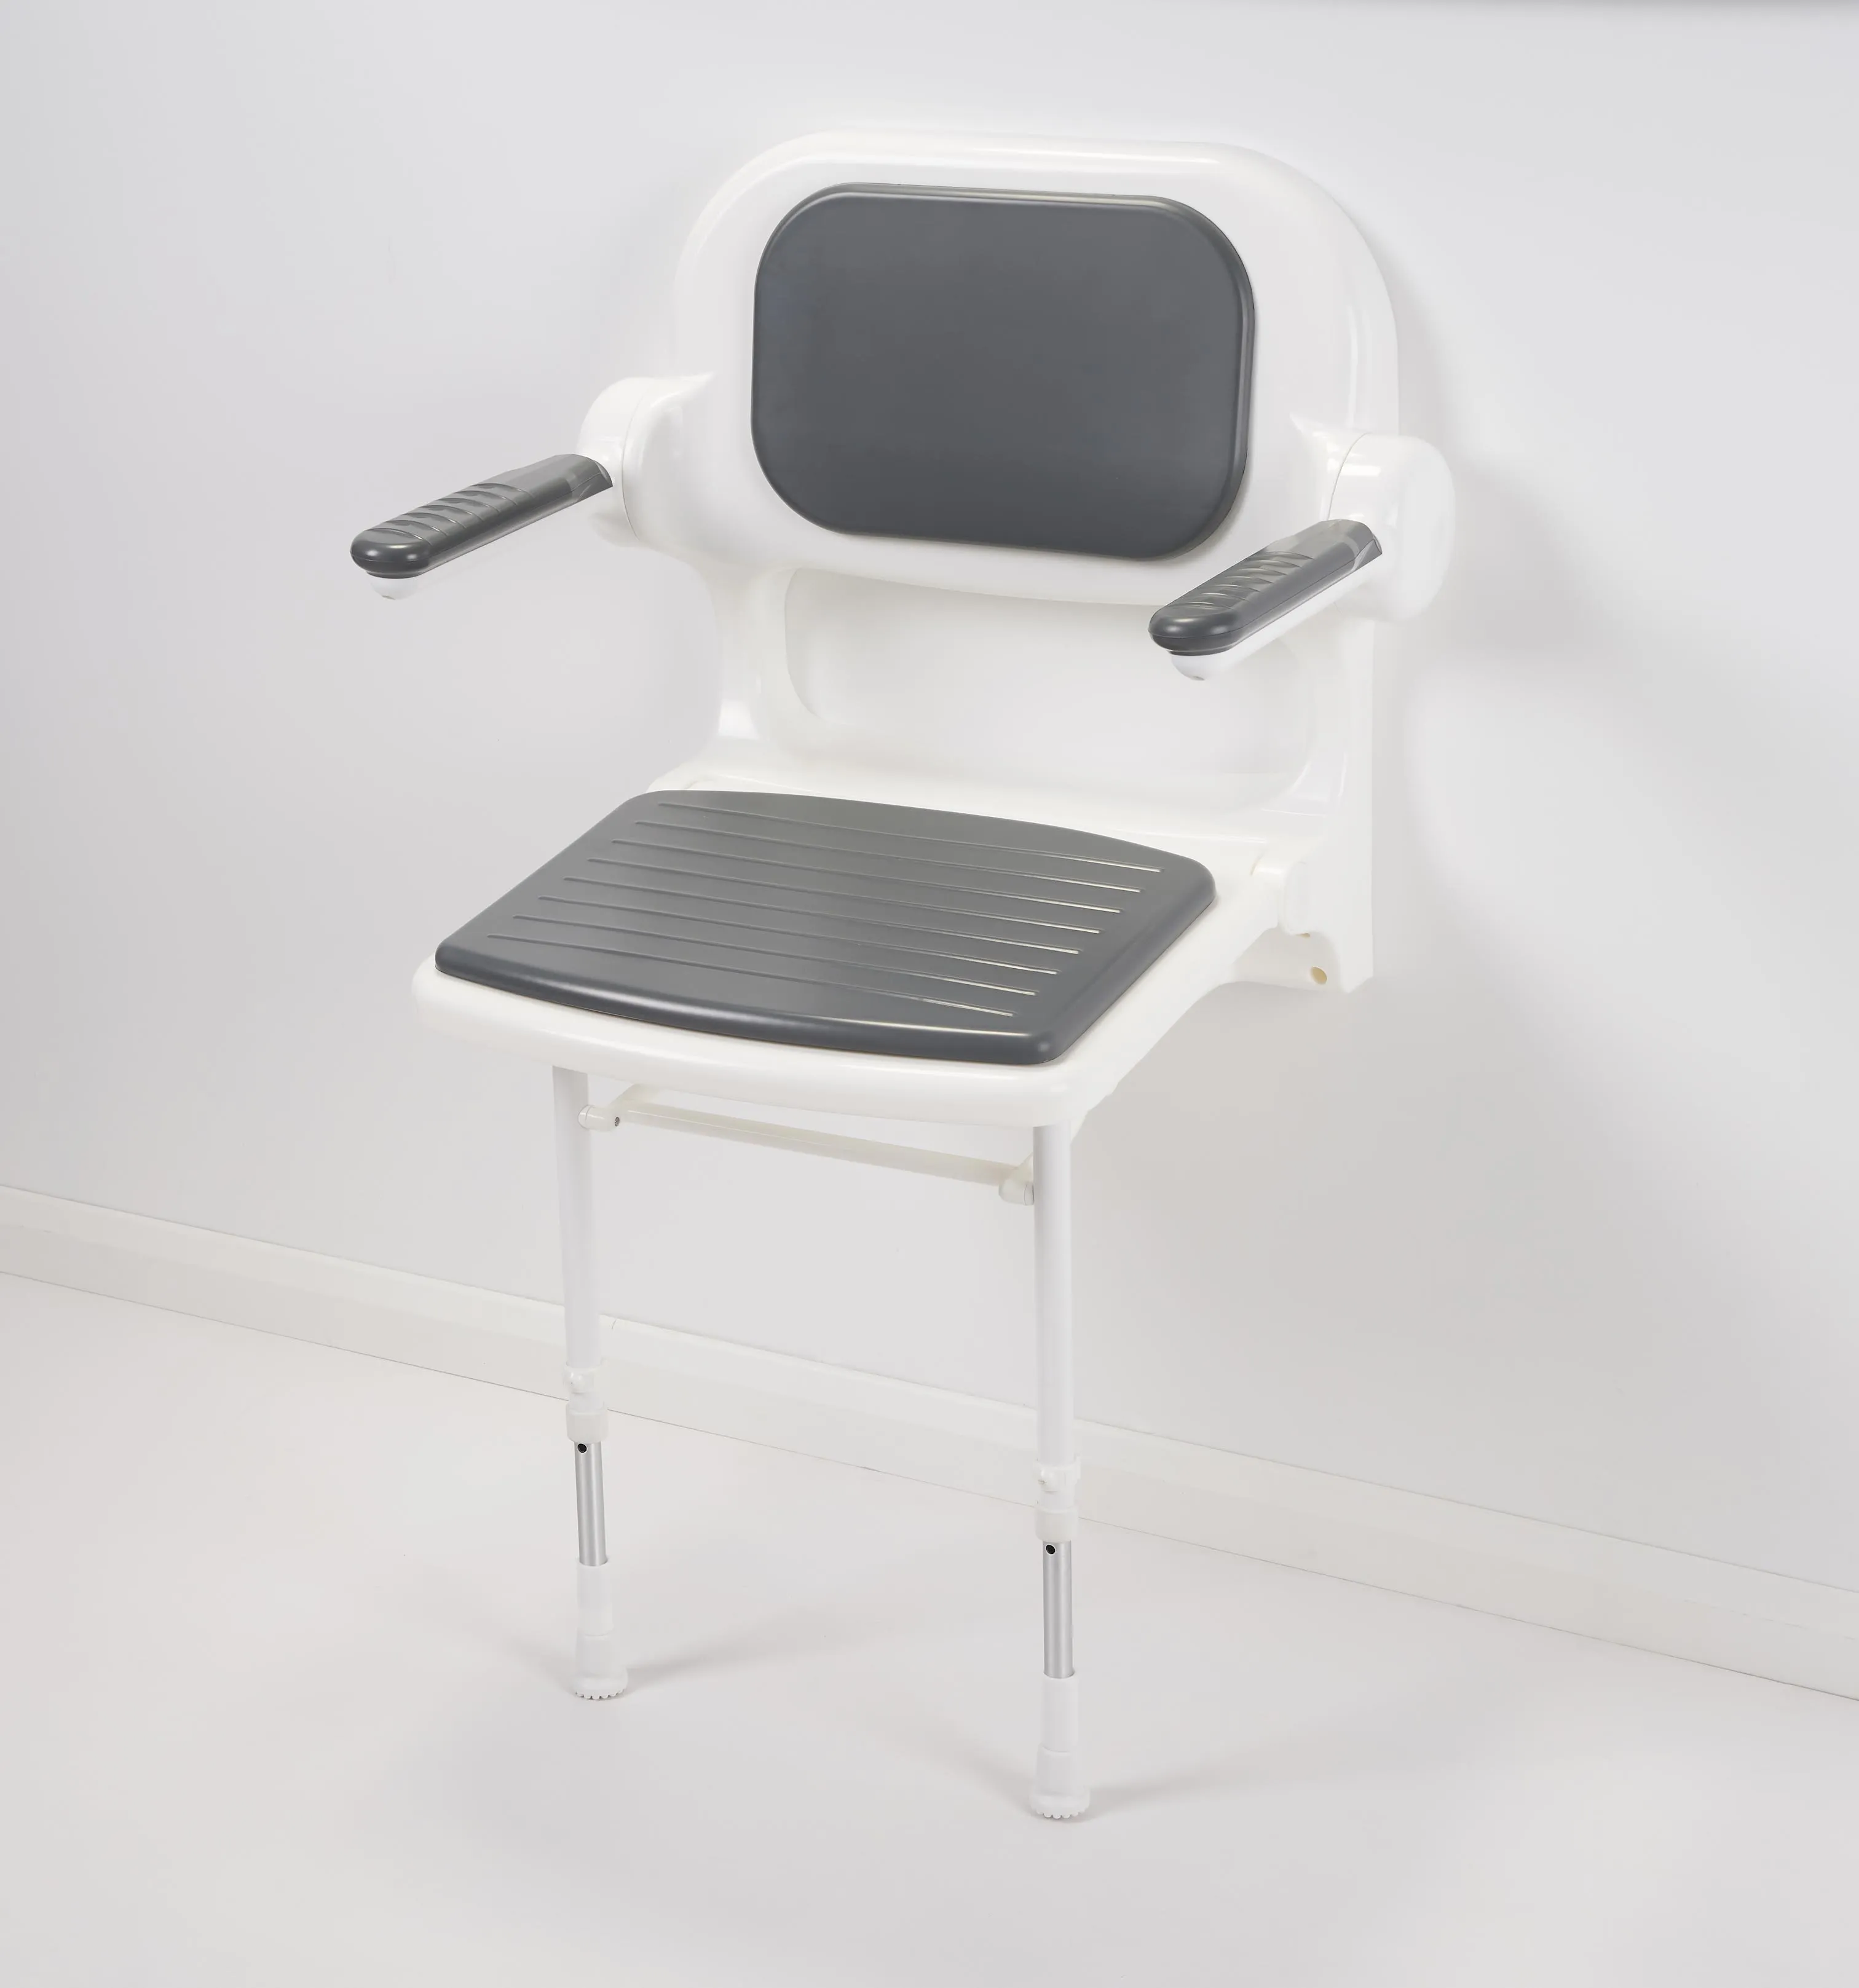 AKW Fold Up Grey Padded Shower Seat with Back and Arm Rest - 02132P